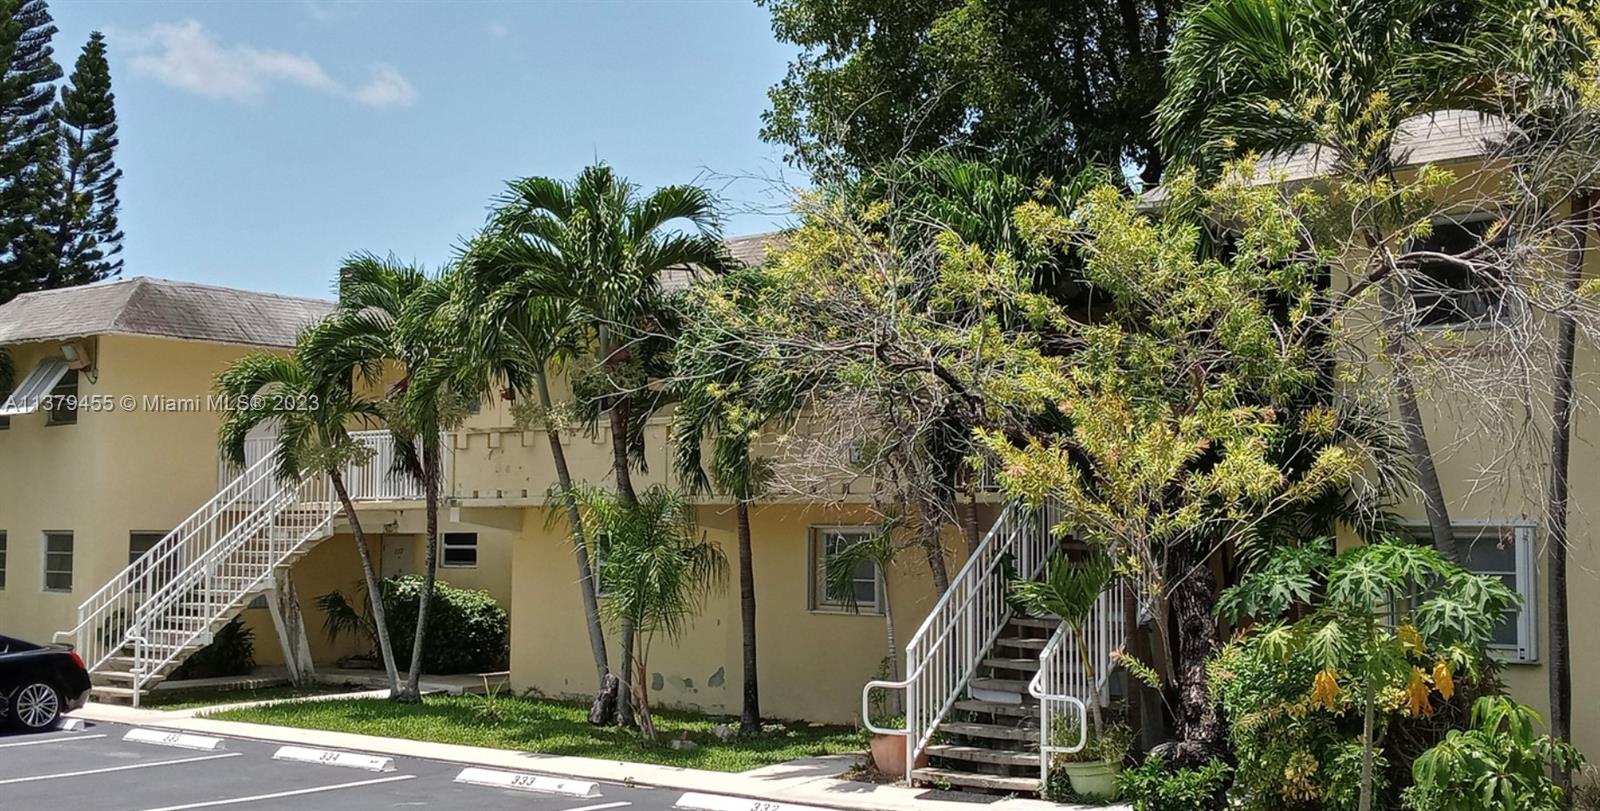 LOCATION! LOCATION! 2/2 APARTMENT IN DADELAND AREA. TILE FLOORS, WASHER & DRYER INSIDE UNIT LAUNDRY. UNIT IS CURRENTLY UNDER TLC AND WILL BE READY BY MAY 12TH. ACCEPTING CASH OFFERS ONLY. GREAT RENTAL INCOME PROPERTY!